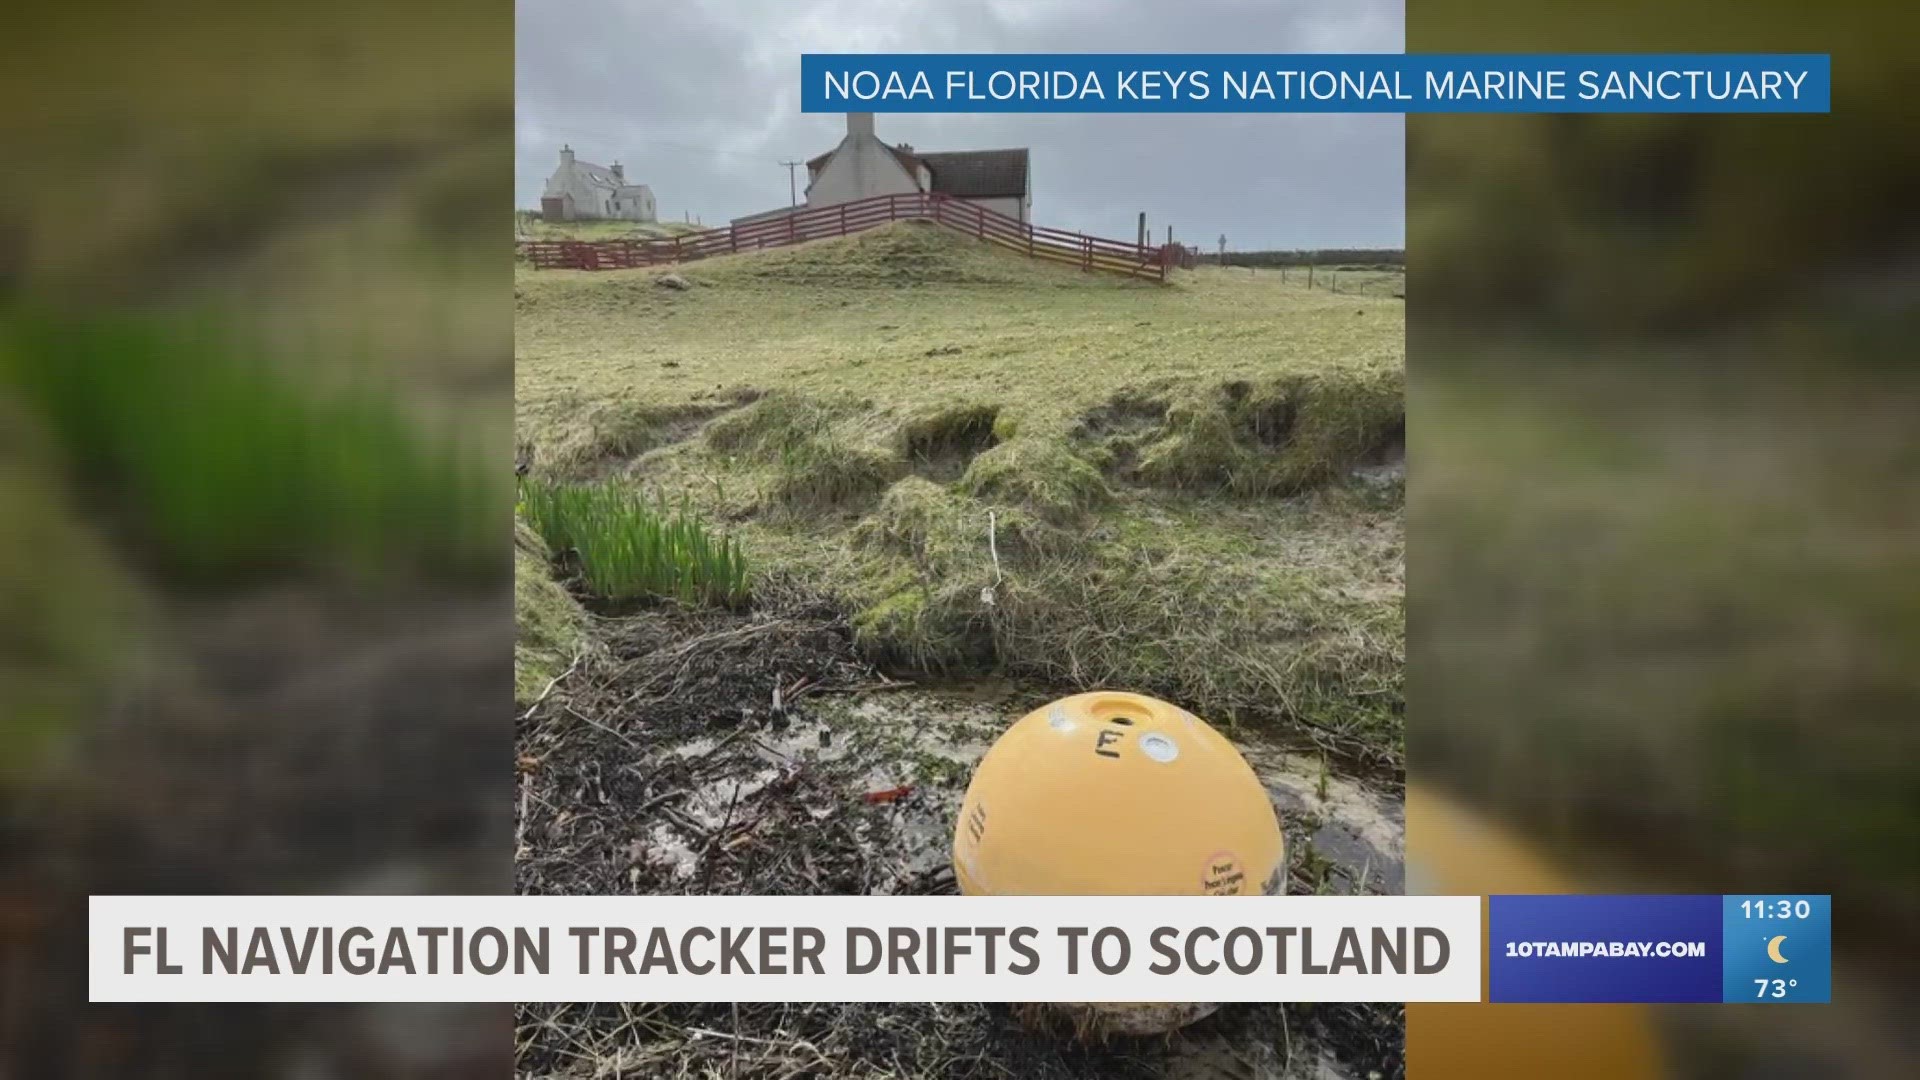 The buoy, belonging to NOAA Florida Keys National Marine Sanctuary, likely flowed from the Gulf Stream into the British Islands, local outlets report.